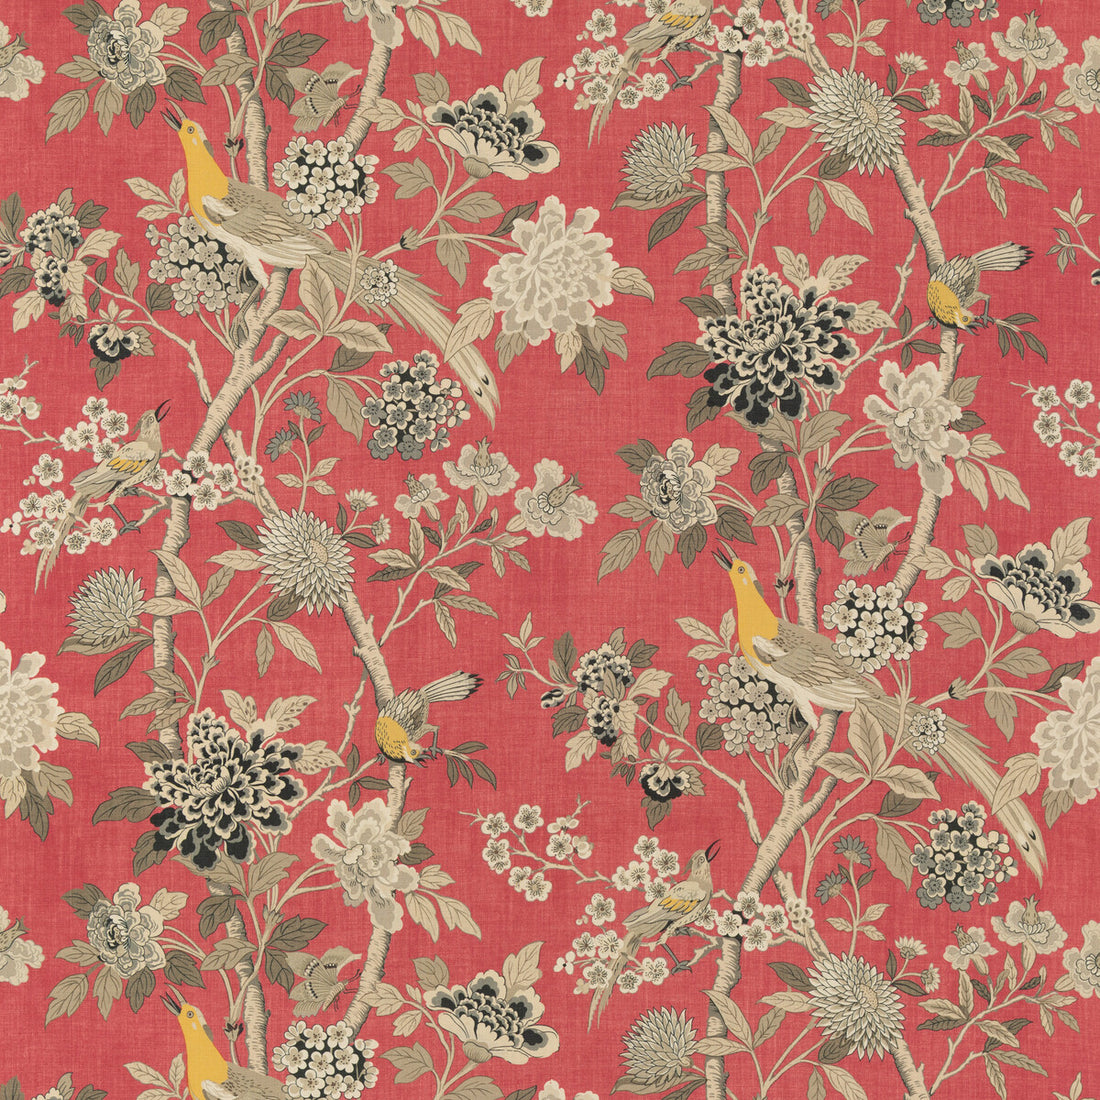 Hydrangea Bird - Archive fabric in old rose color - pattern BP10851.4.0 - by G P &amp; J Baker in the Chifu collection